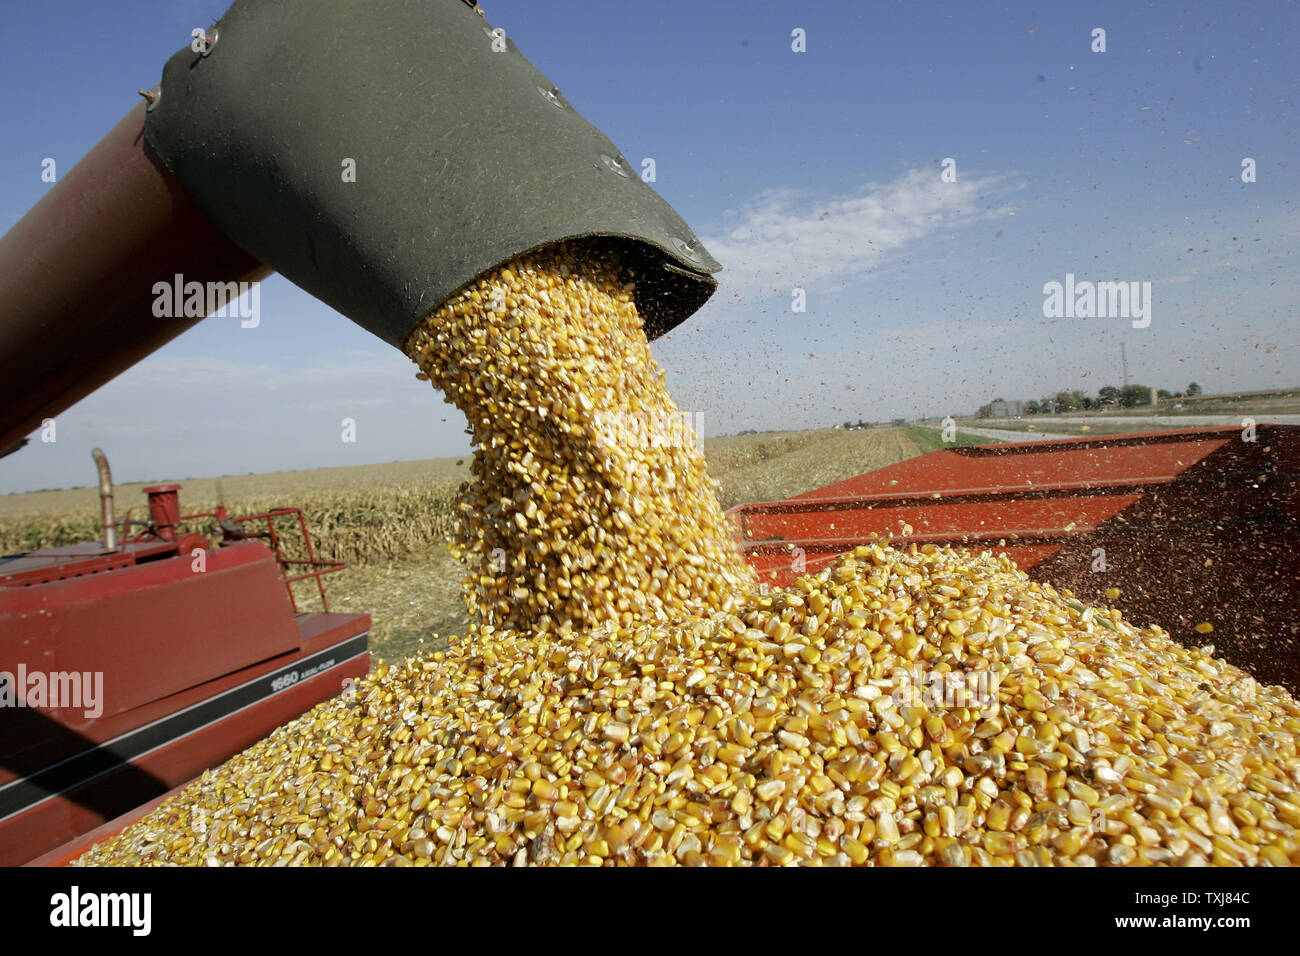 A combine unloads corn on farmland near Manteno, Illinois on October 20, 2008. Corn for December delivery rose $0.155 per bushel at the Chicago Board of Trade closing at $4.185 Monday as rebounding oil markets shift investor focus to commodities. (UPI Photo/Brian Kersey) Stock Photo